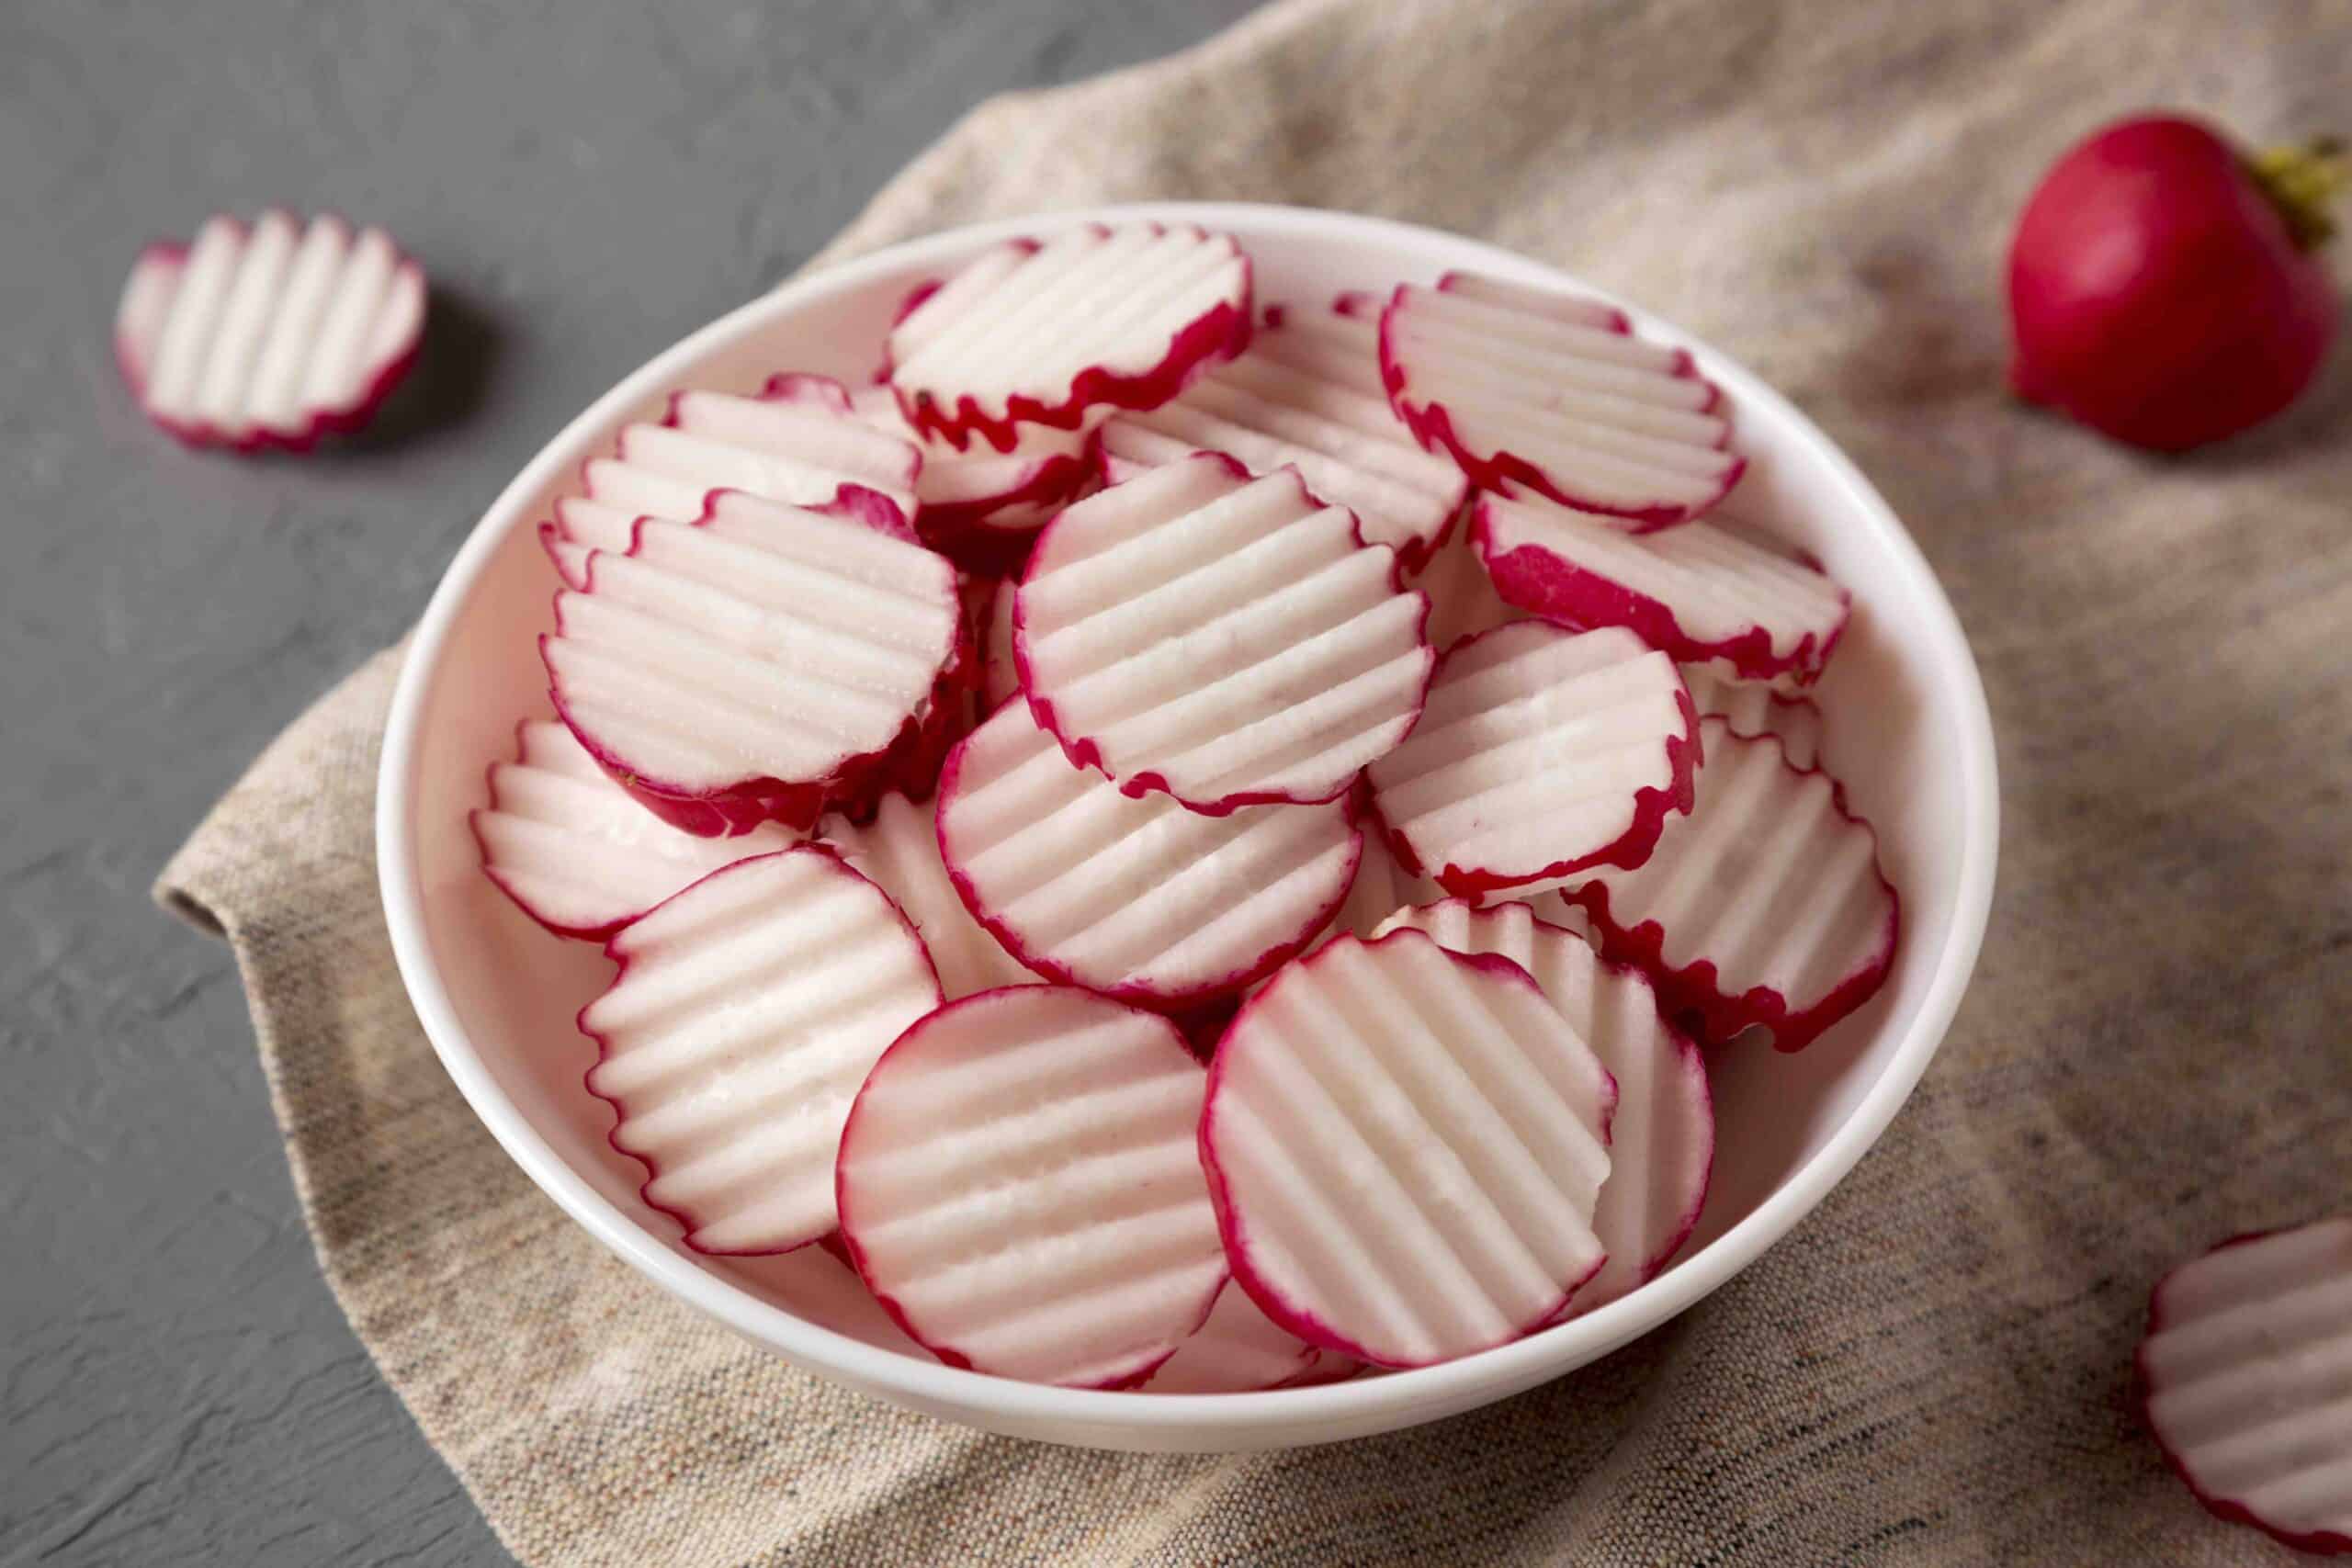 Fresh Radish Chips Slices in a white bowl on a gray background, low angle view. Close-up.